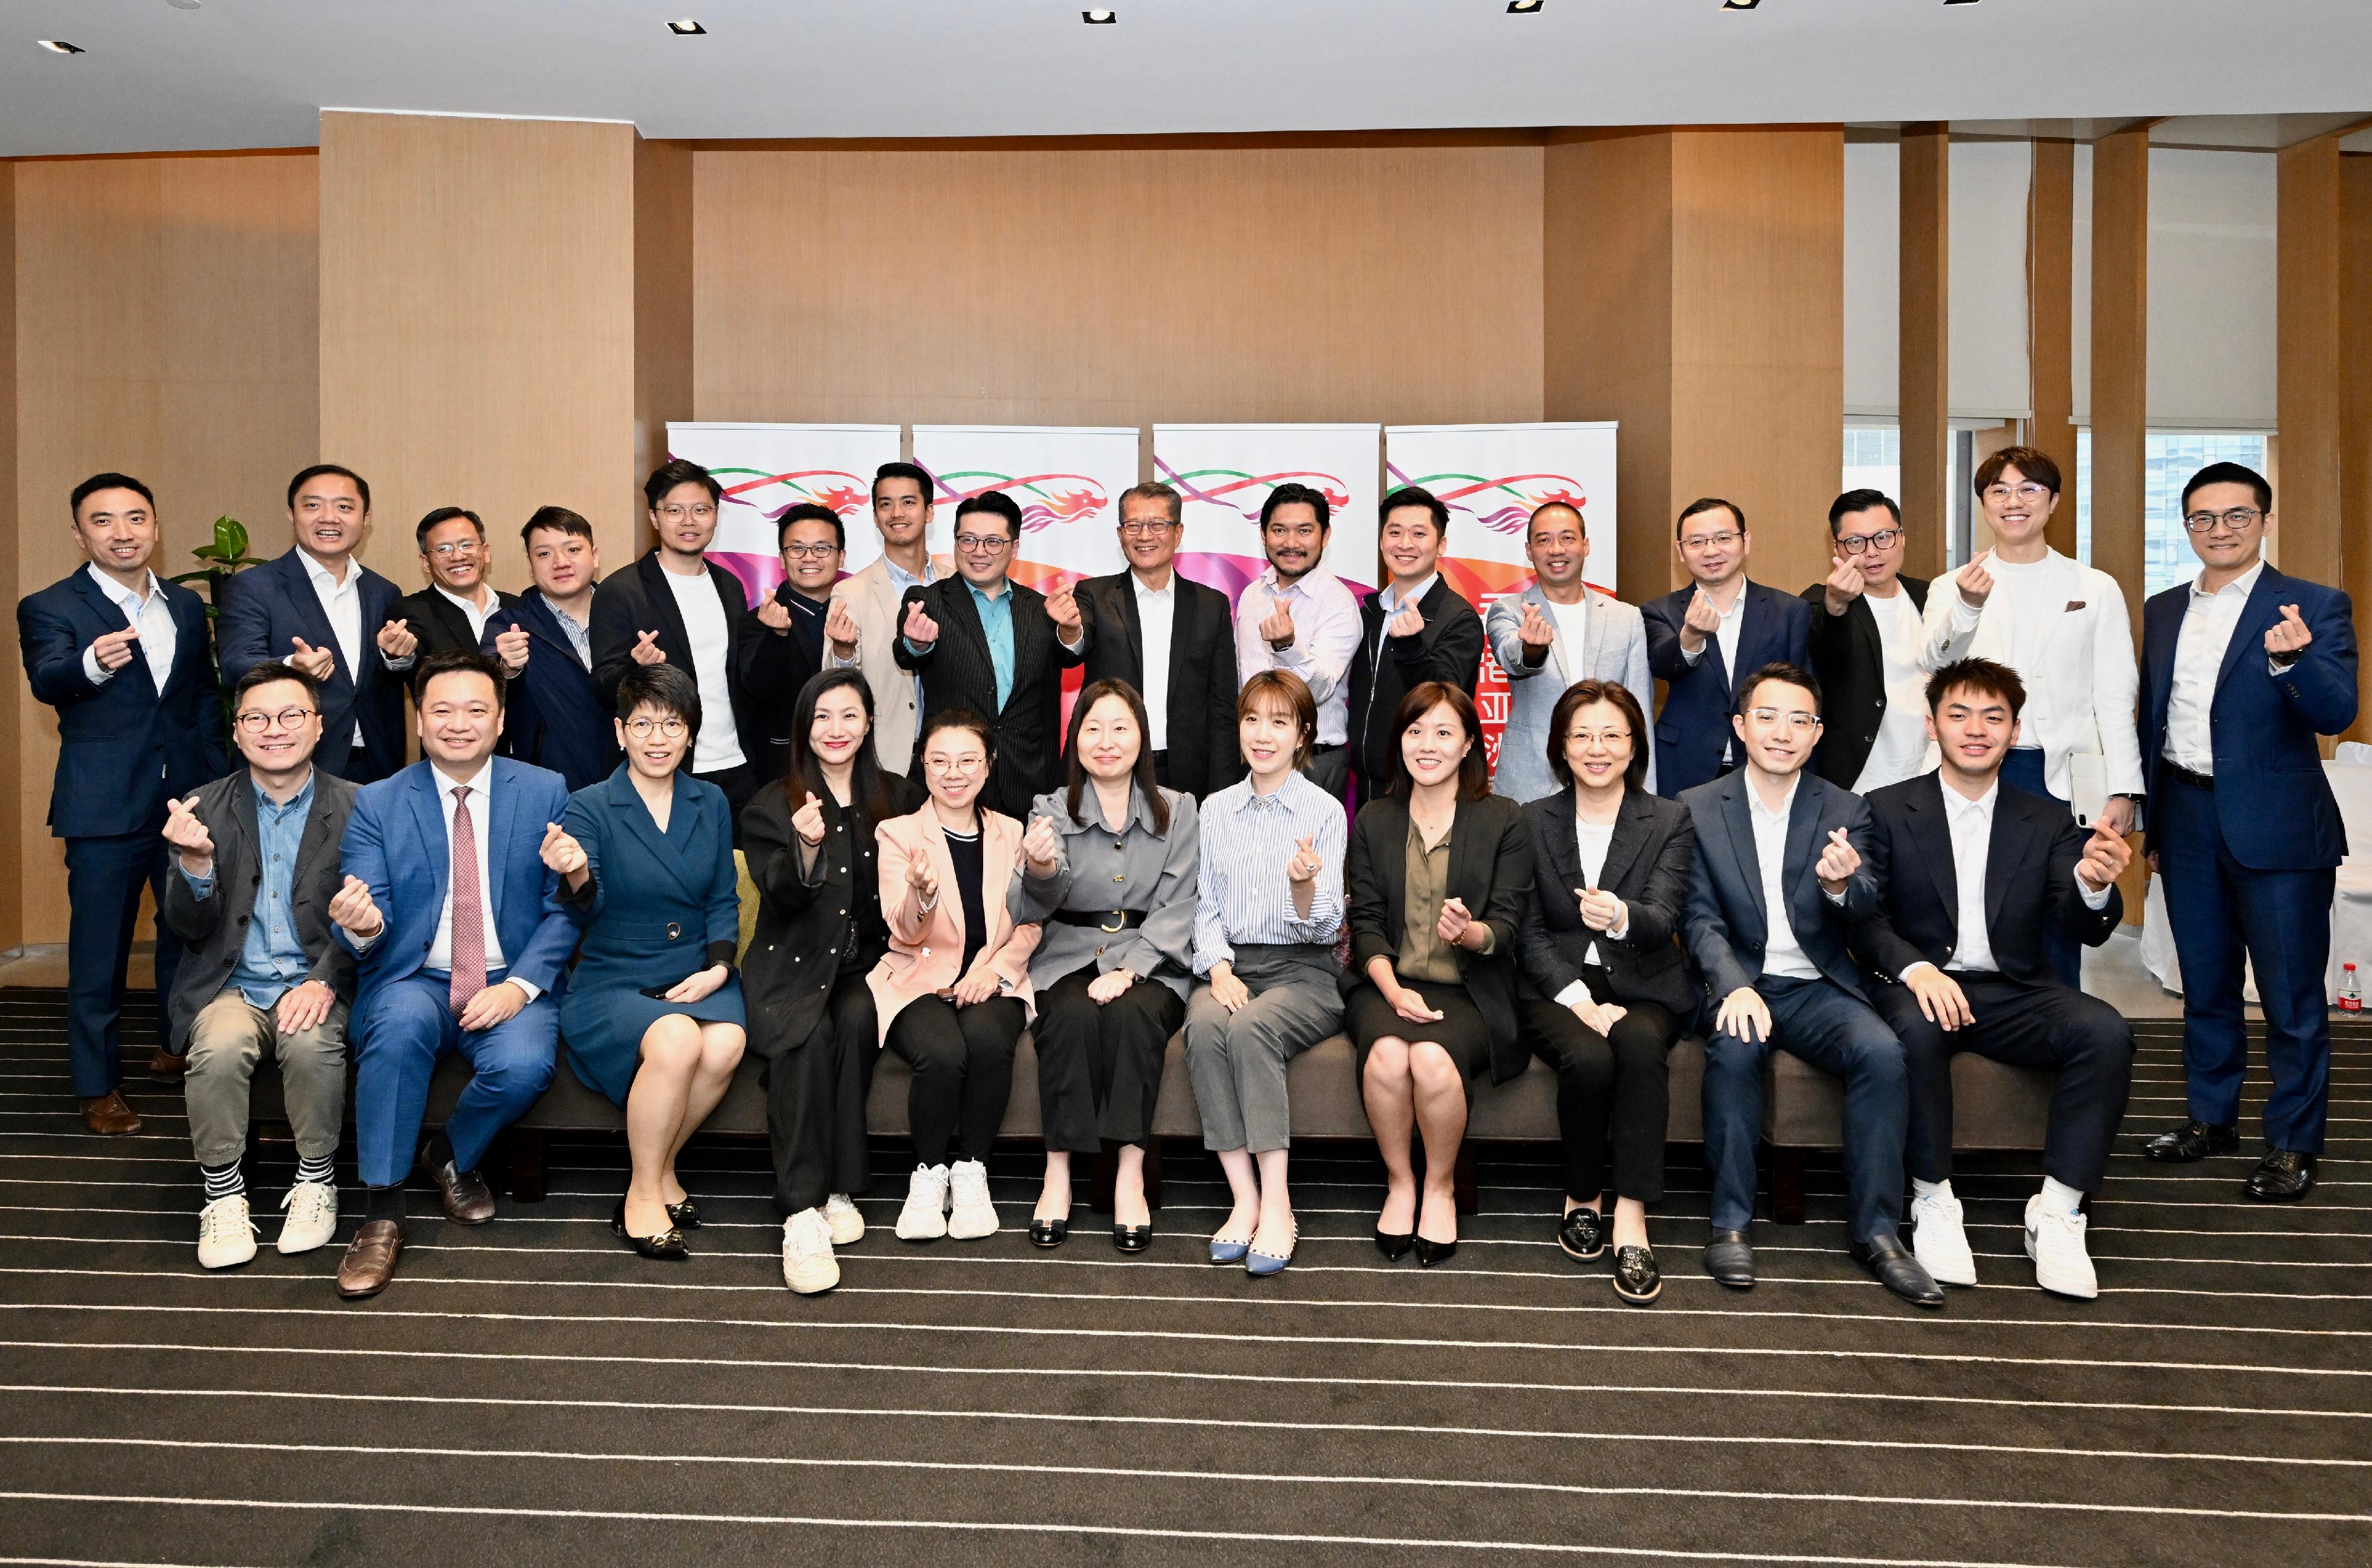 The Financial Secretary, Mr Paul Chan, meets with the Hong Kong young entrepreneurs in Guangzhou today (March 15) and exchanges views with them. Photo shows Mr Chan (back row, eighth right) with the Hong Kong young entrepreneurs.